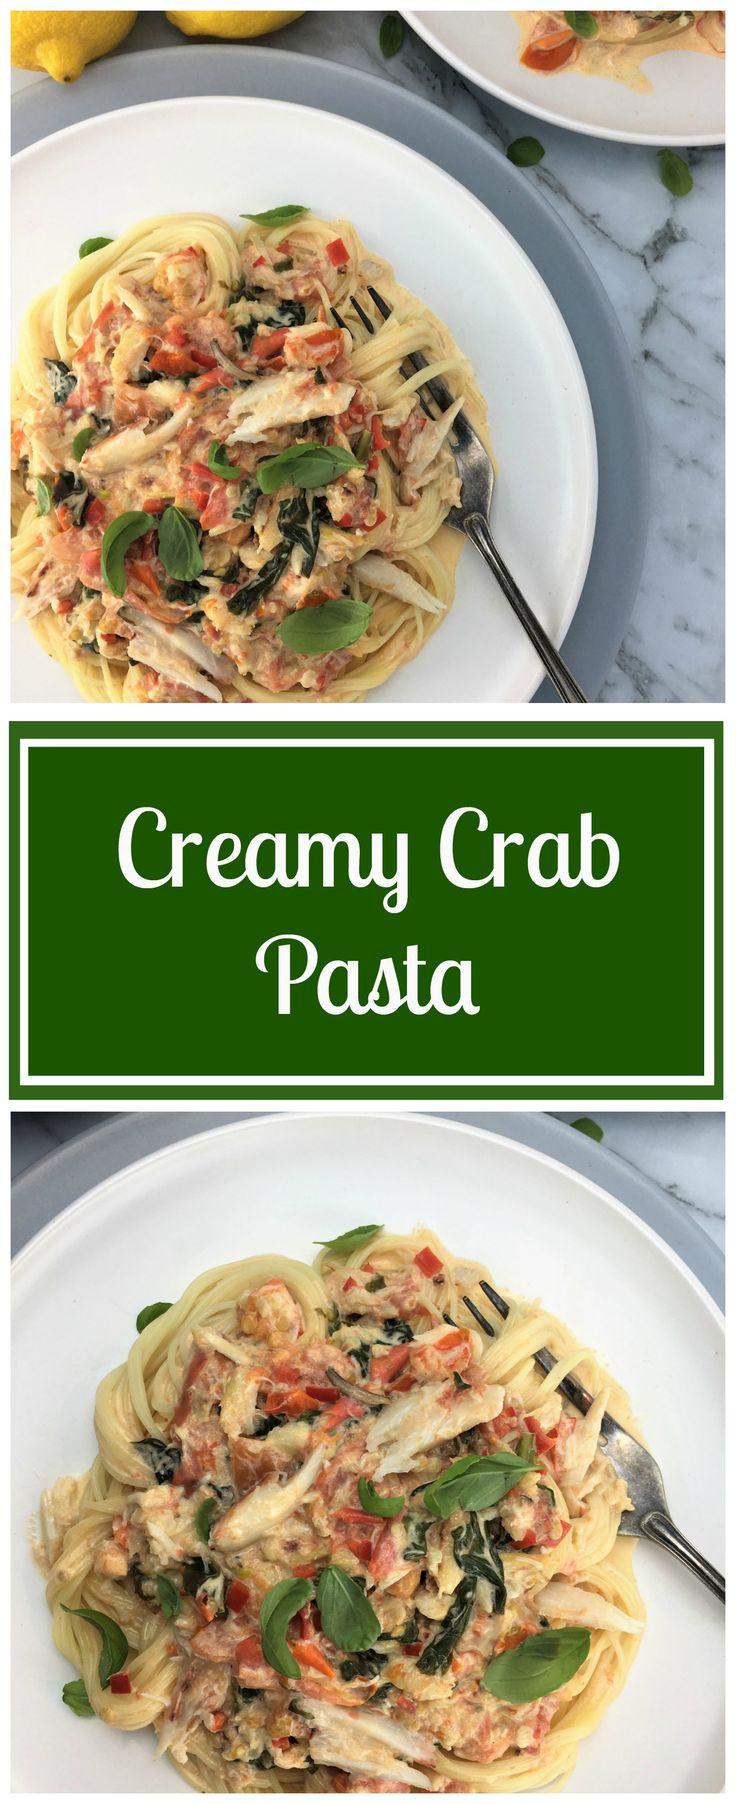 Wedding - Creamy Crab Pasta With Chilli And Basil